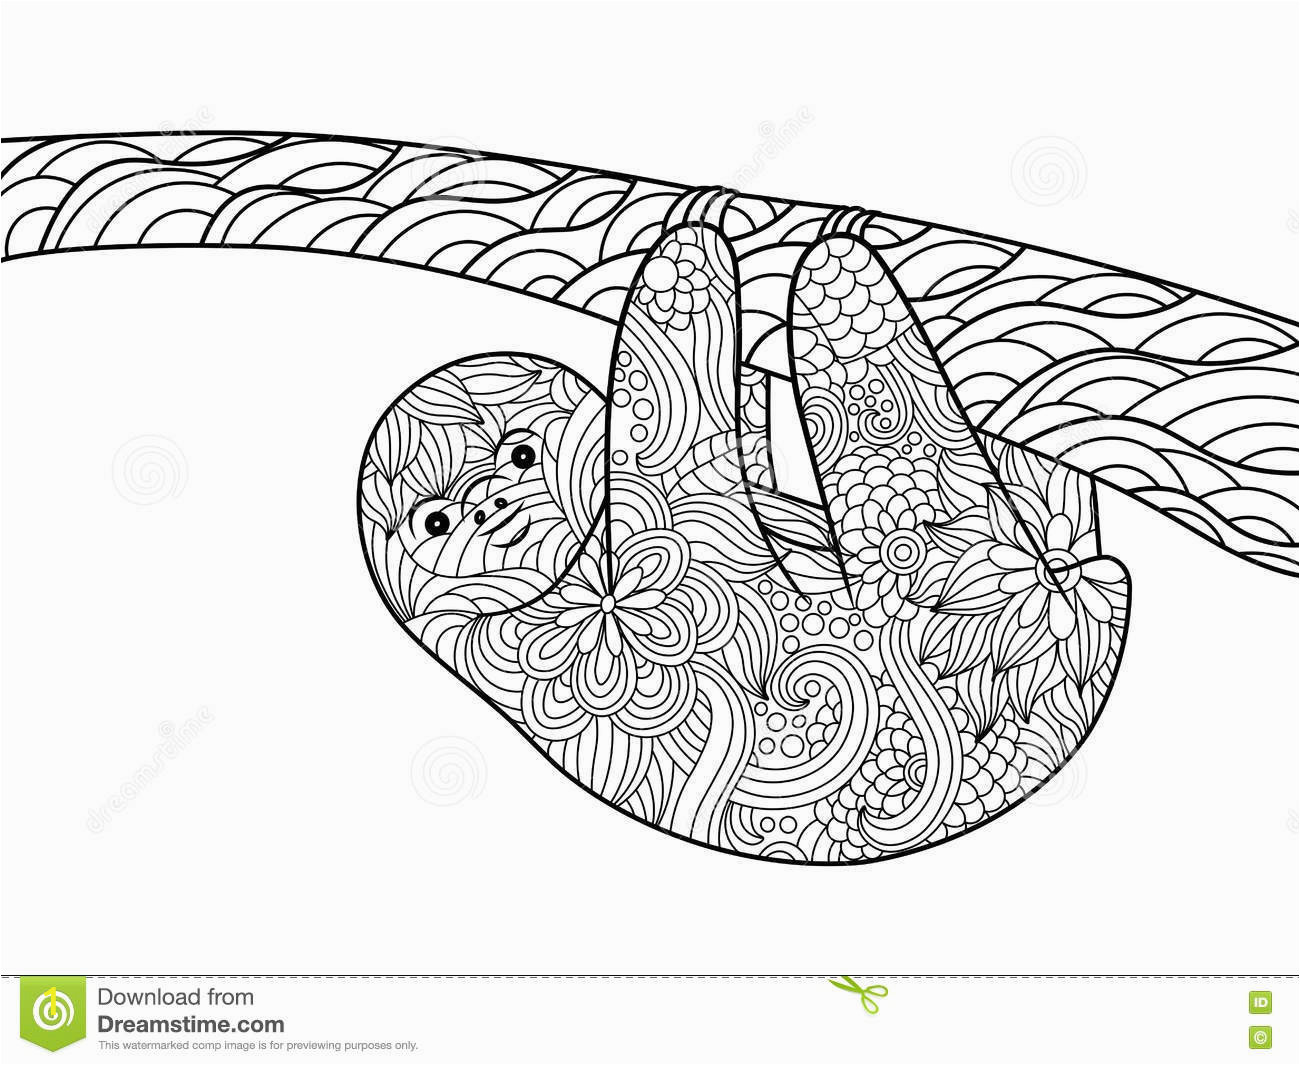 sloth coloring book adults vector illustration